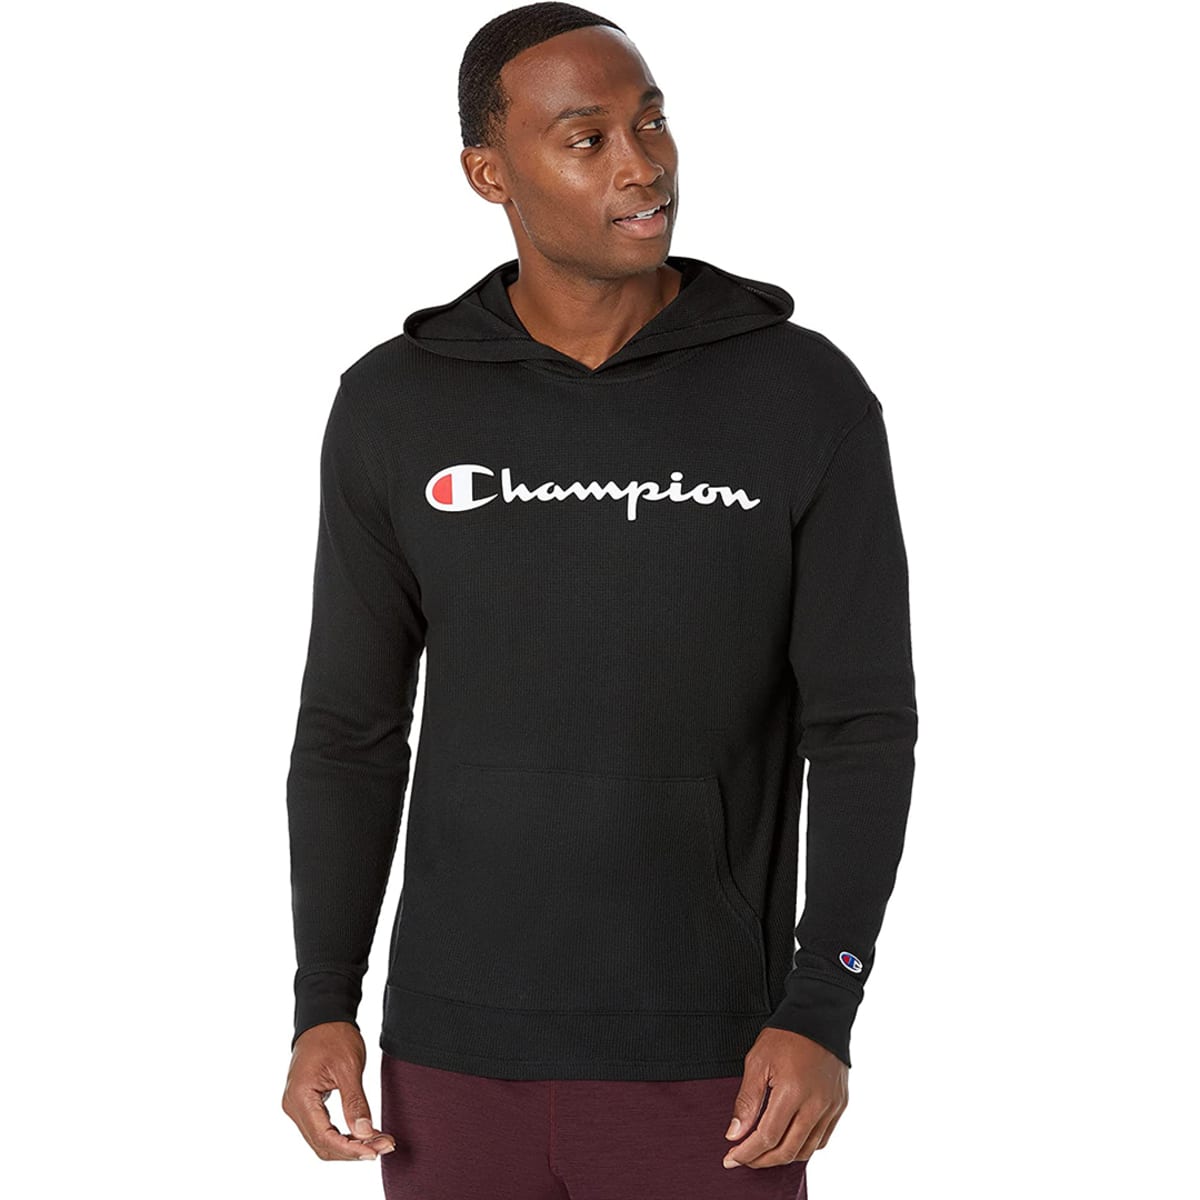 This Champion Waffle Pullover Hoodie is Perfect to Bundle Up In